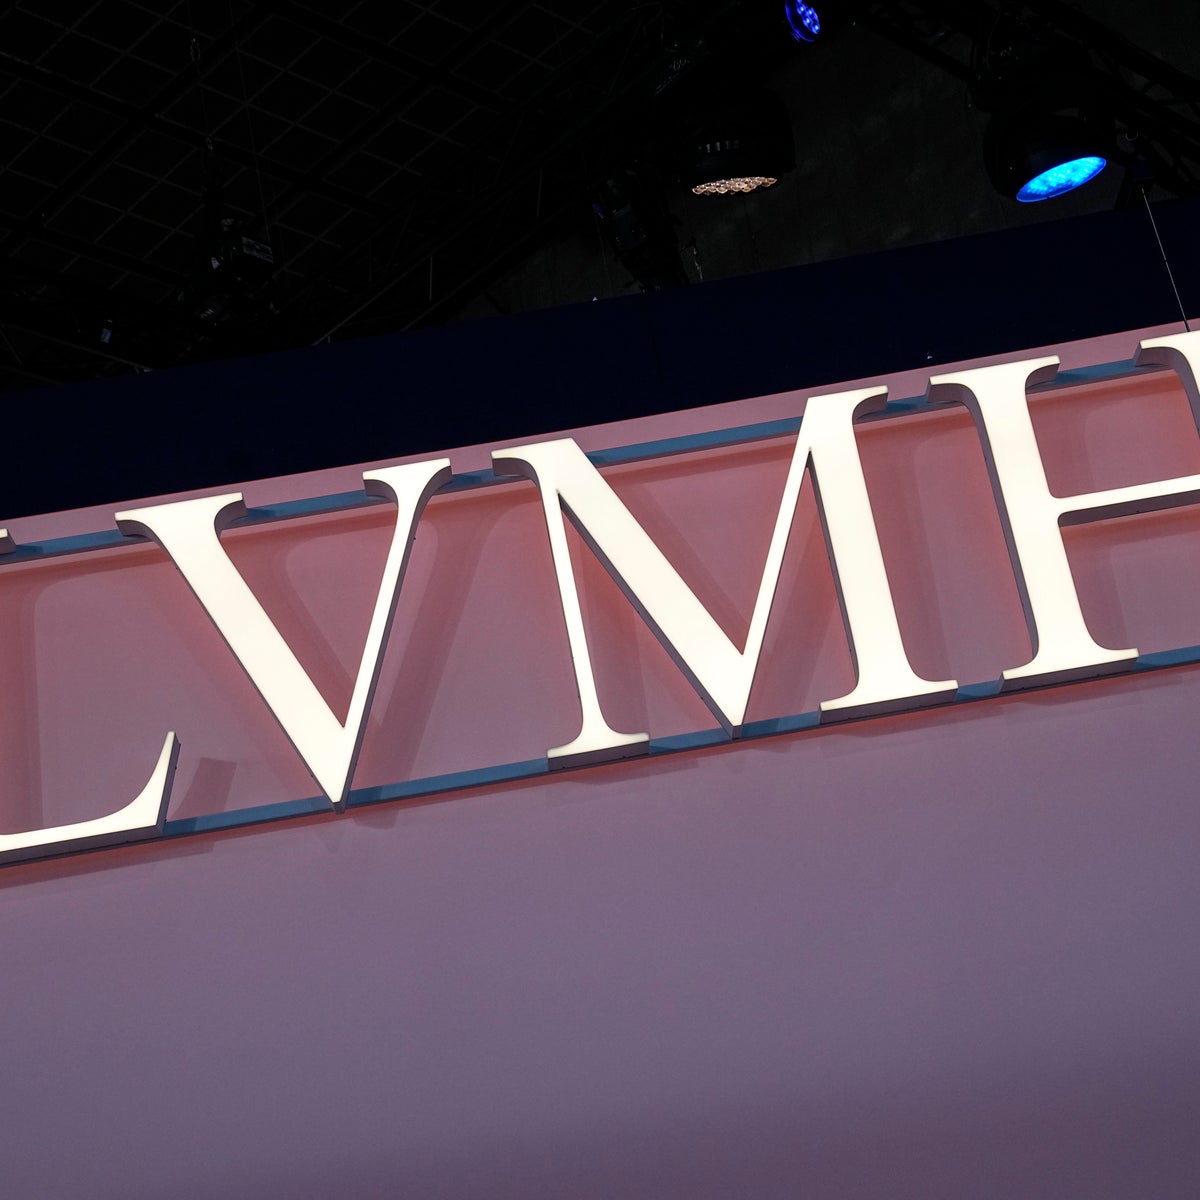 Luxury group LVMH joins top-tier French sponsors of the 2024 Paris